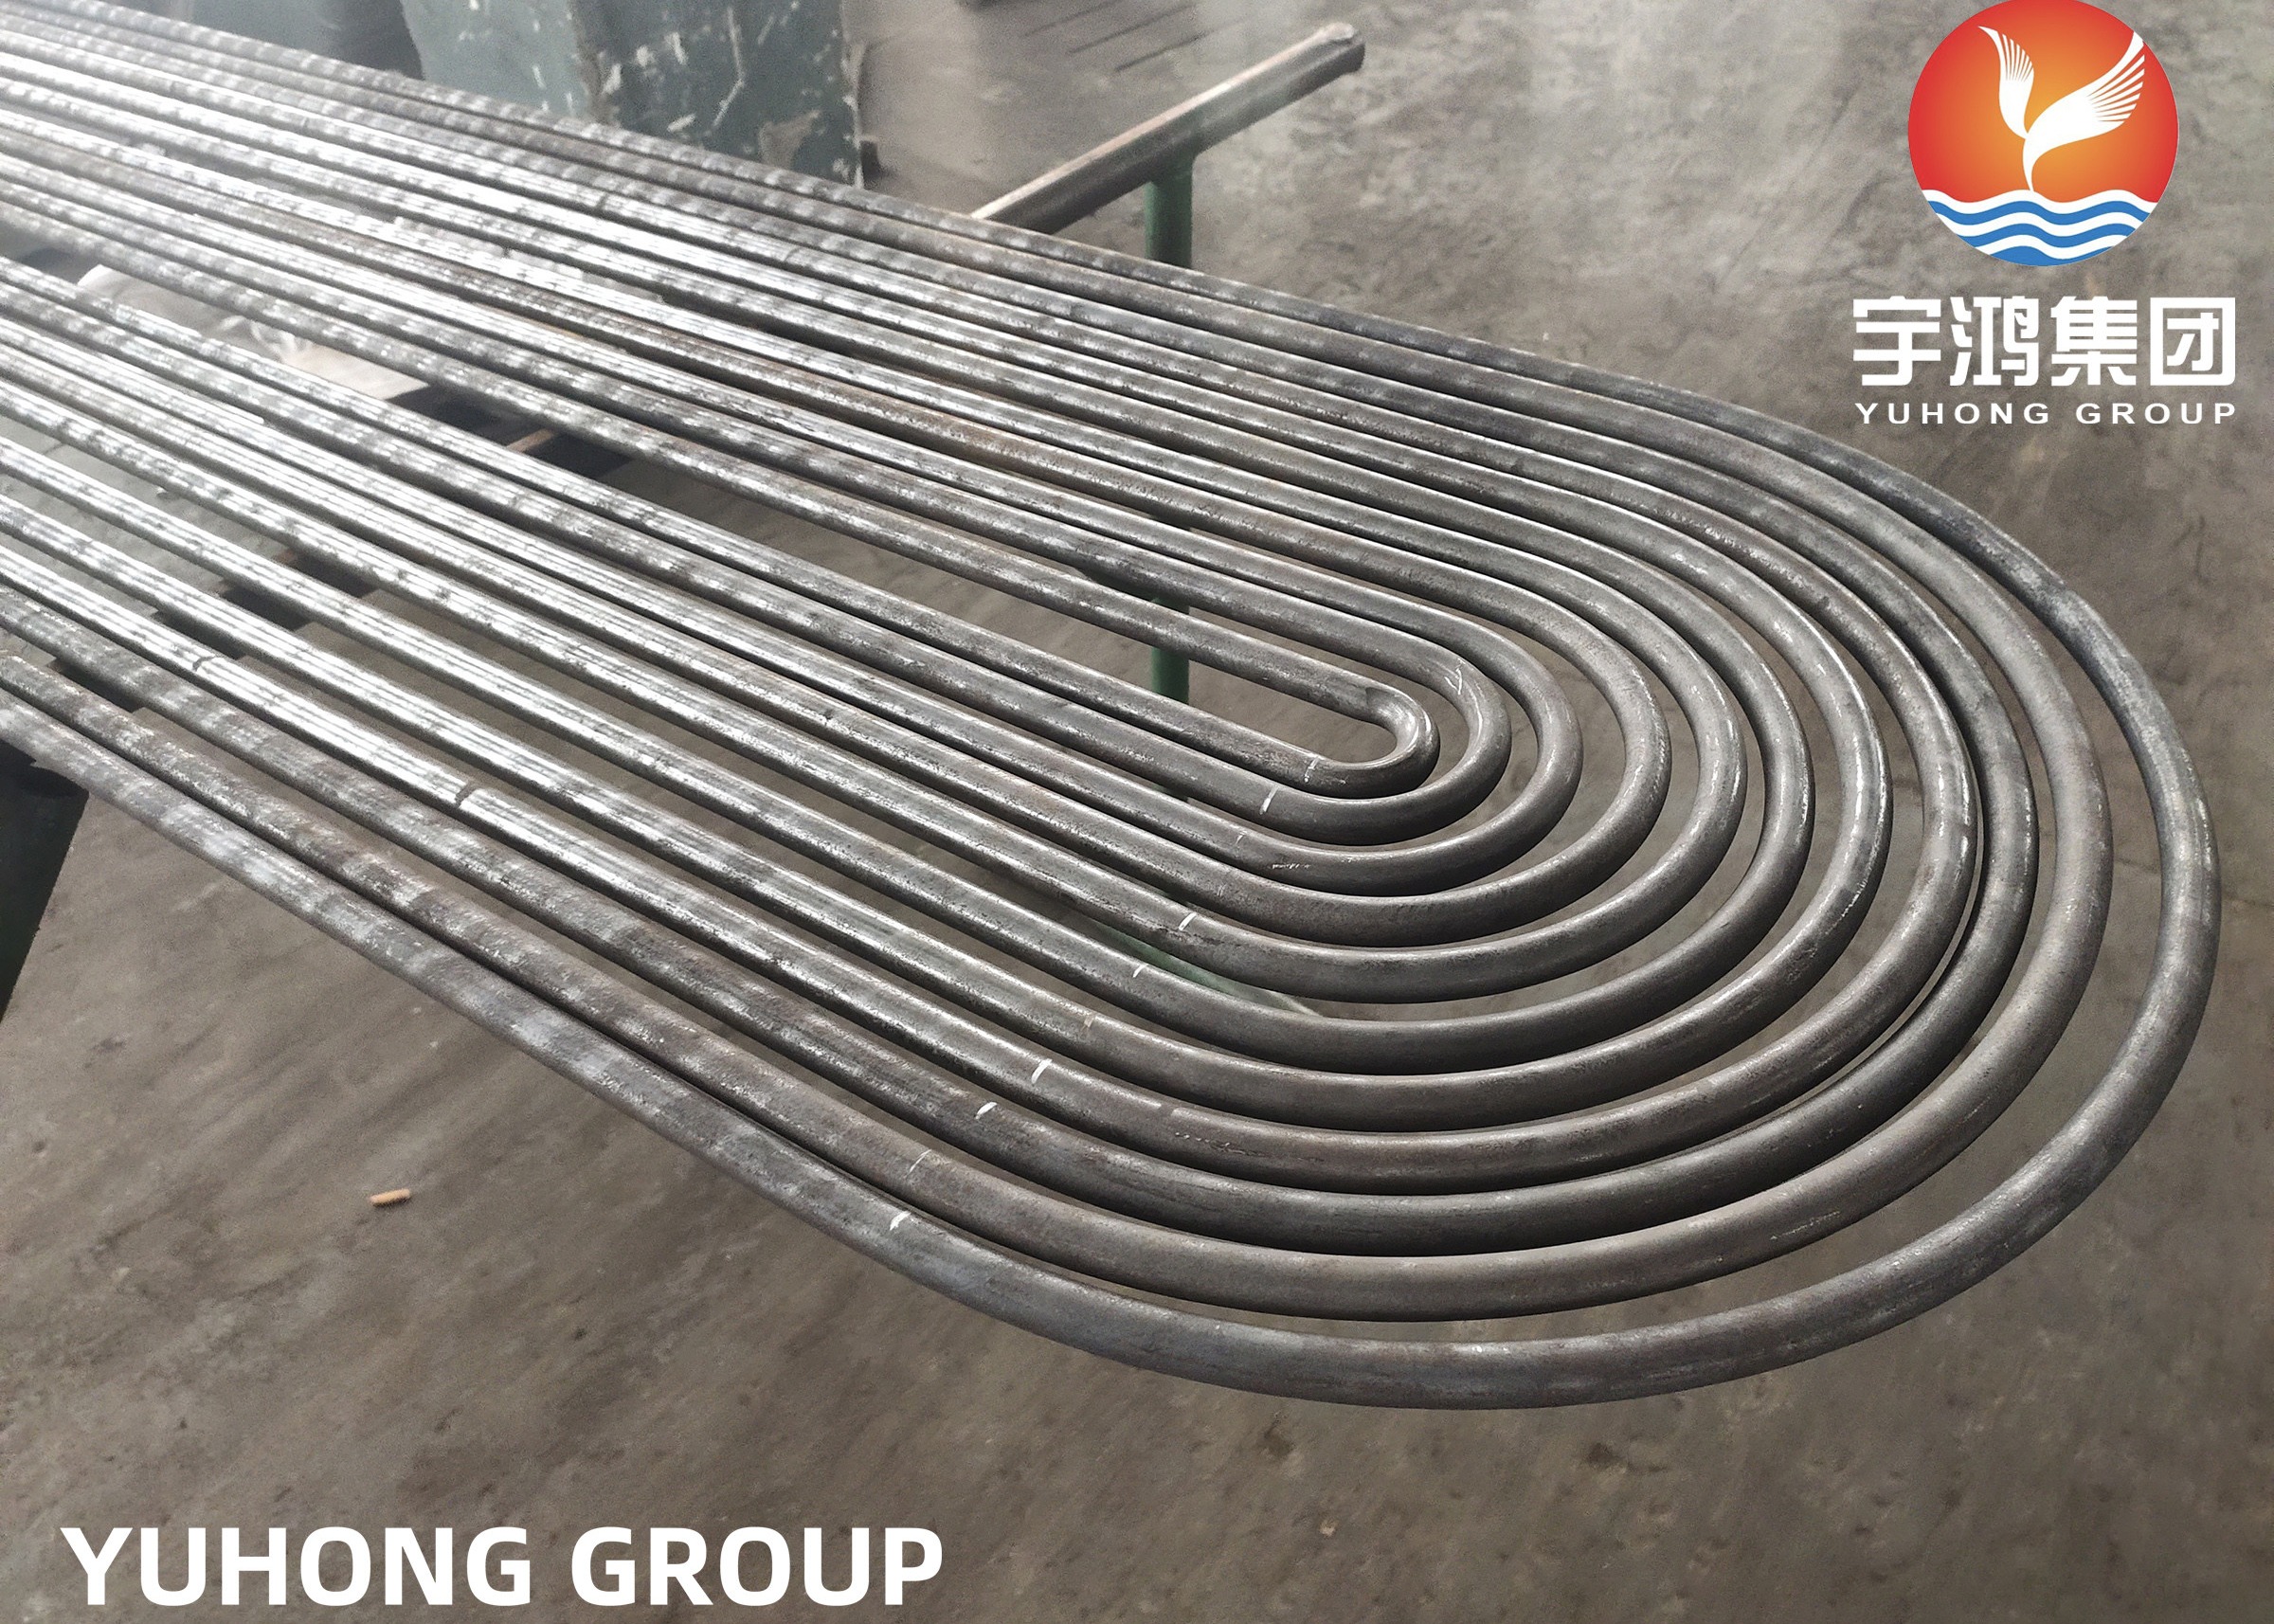 China ASME SA179 SMLS COLD DRAWN LOW CARBON STEEL U BEND TUBES FOR TUBULAR HEAT EXCHANGERS AND CONDENSERS wholesale